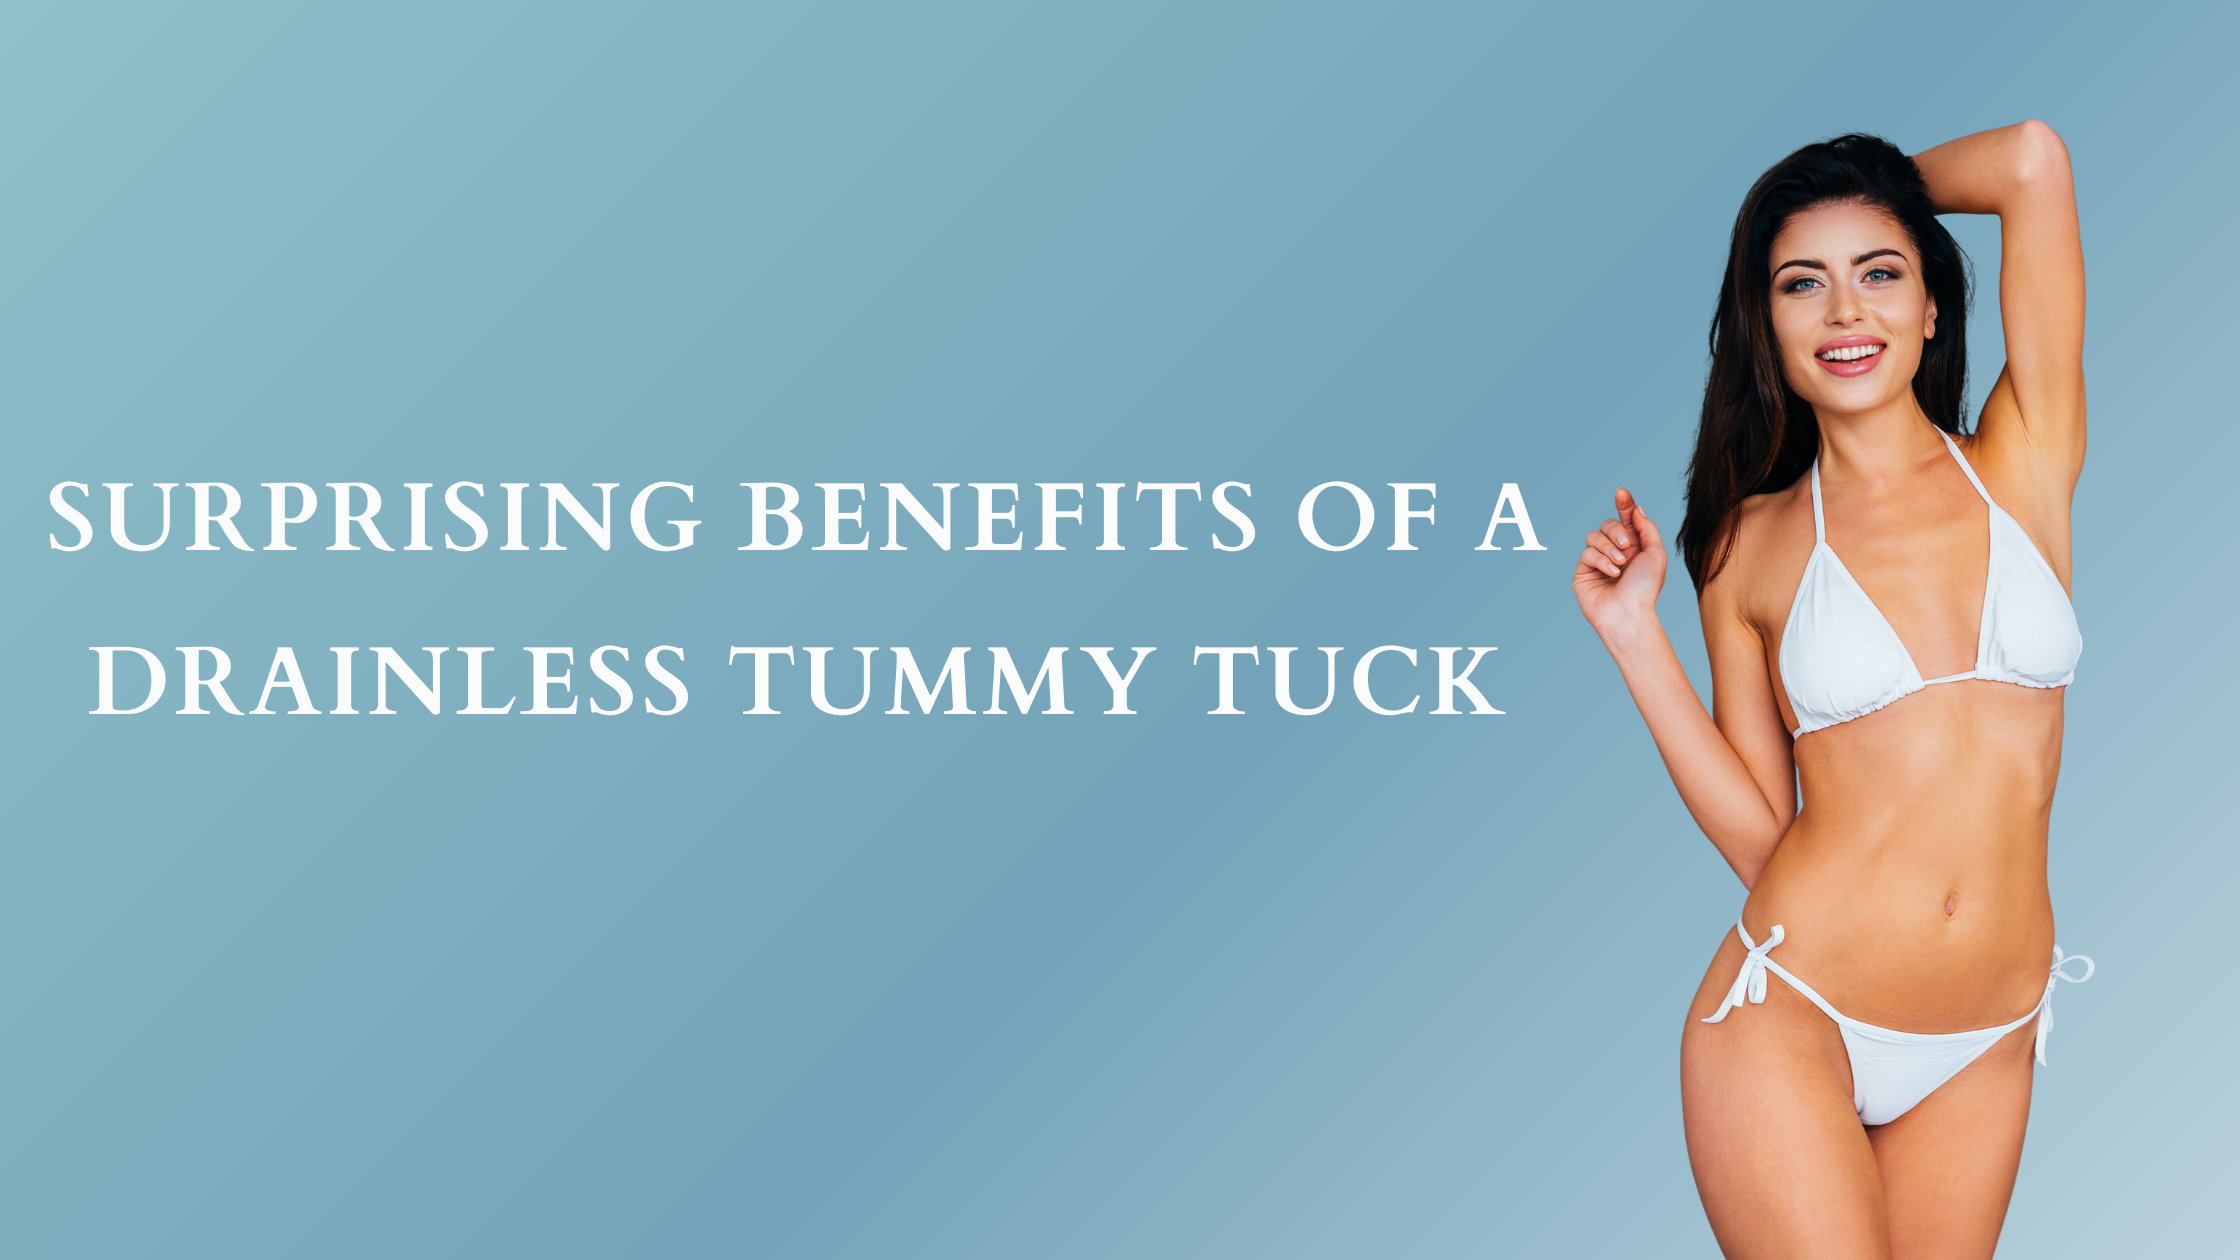 Top Benefits Of A Drainless Tummy Tuck Over A Traditional Tummy Tuck